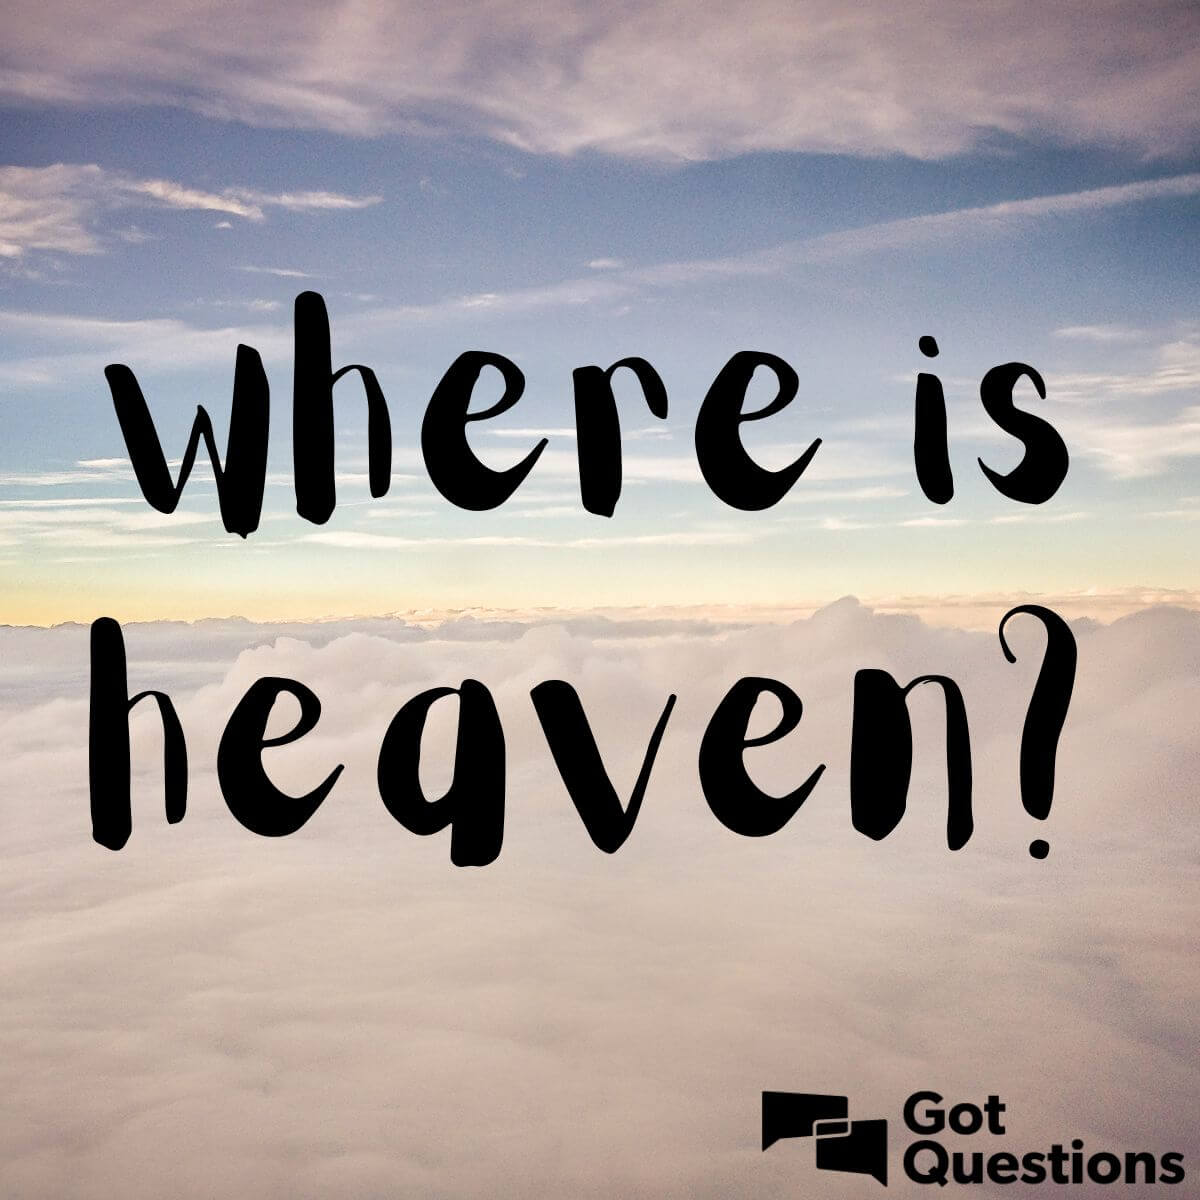 what does heaven look like according to the bible